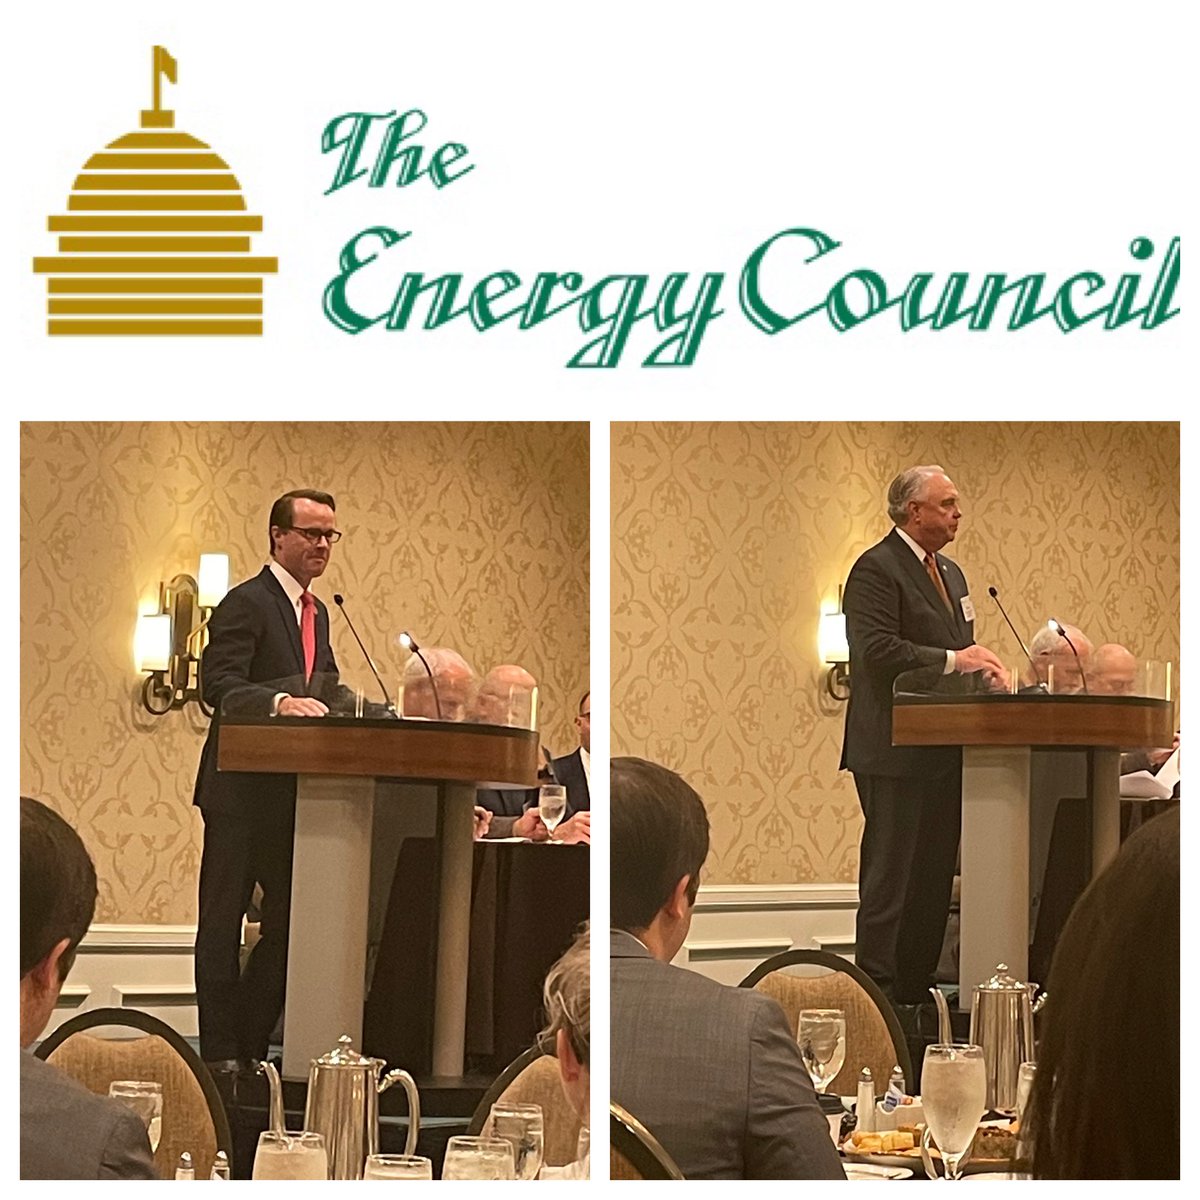 Texas leadership shared stats at today's EnergyCouncil meeting in San Antonio. Texas tax collections at $77.21 bn, up 25.6% – in good part due to #natgas production #tax revenue: $4.47 bn in FY ’22, up 185% from previous fiscal. @DadePhelan @DrewDarbyTX #pipelines #txlege #Texas